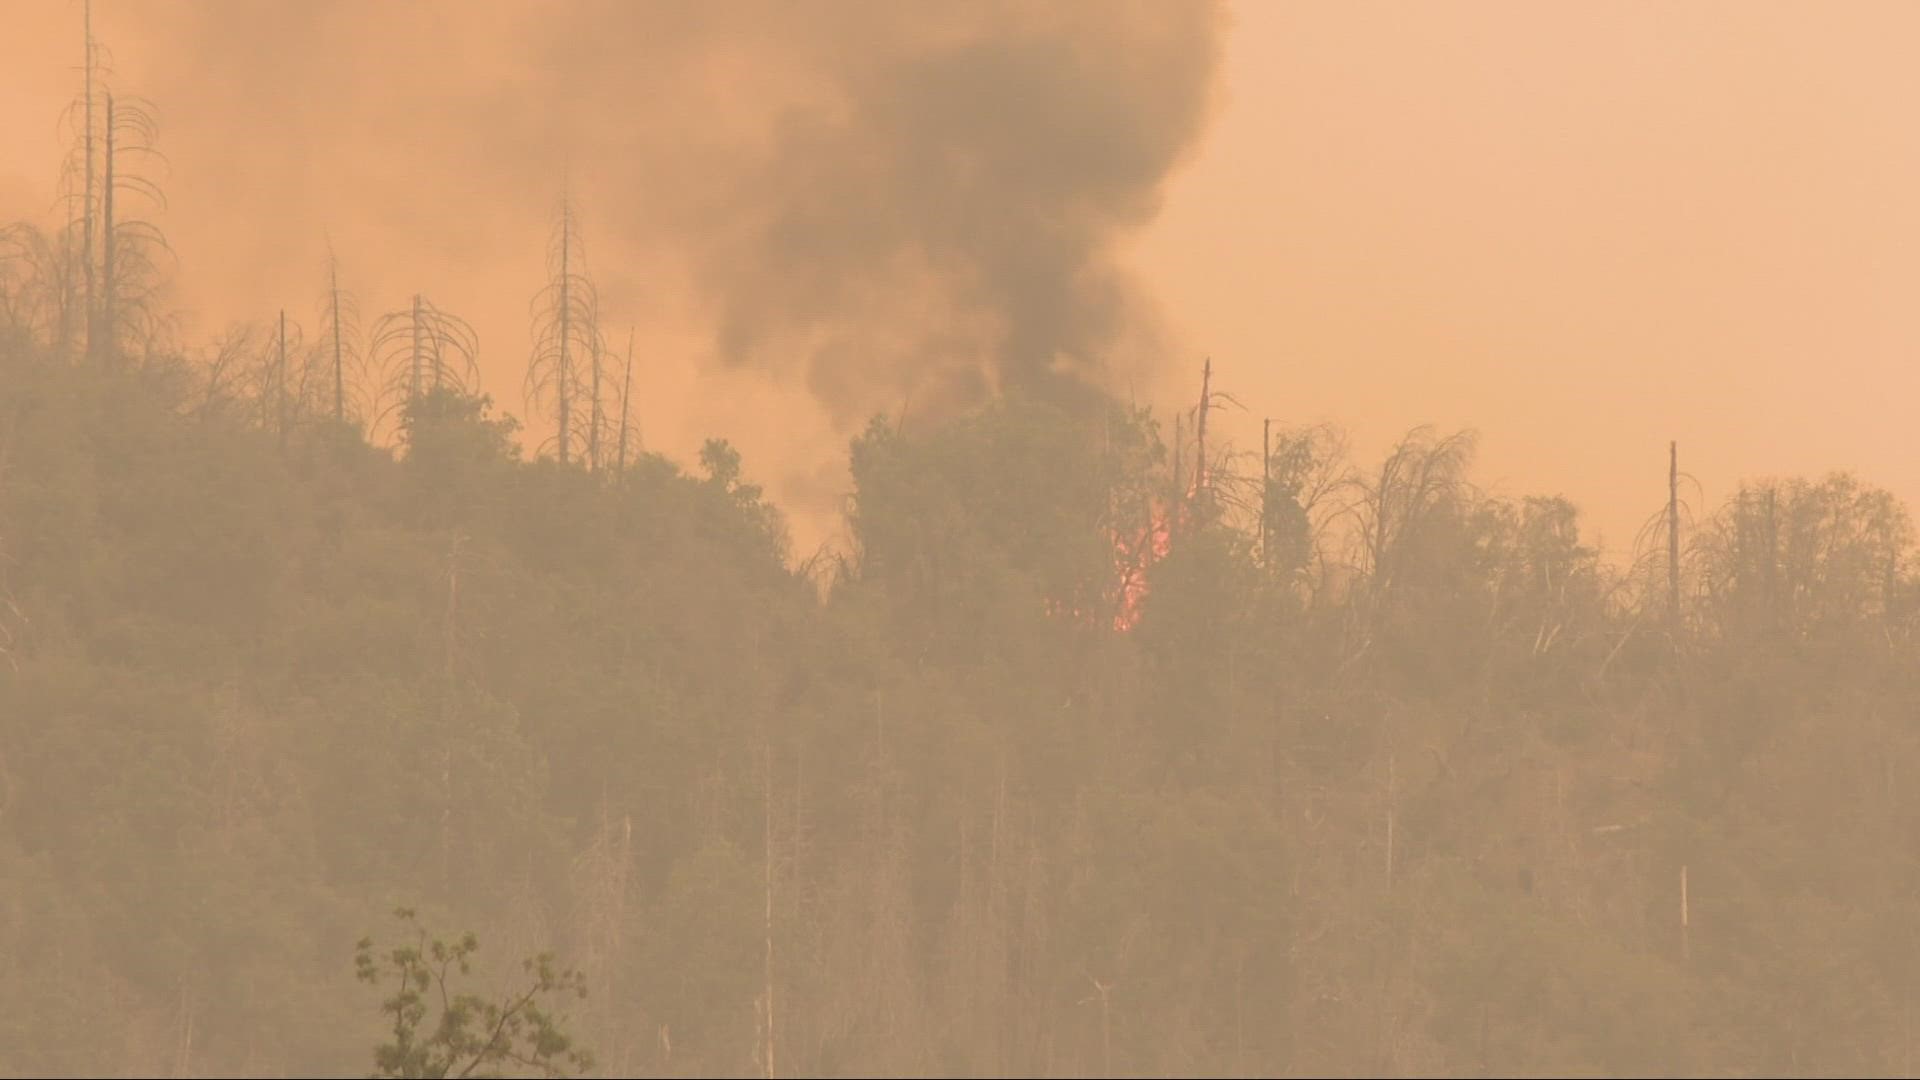 Fire crews continue to battle the Oak Fire that has burn over 18,000 acres with now 26% containment.